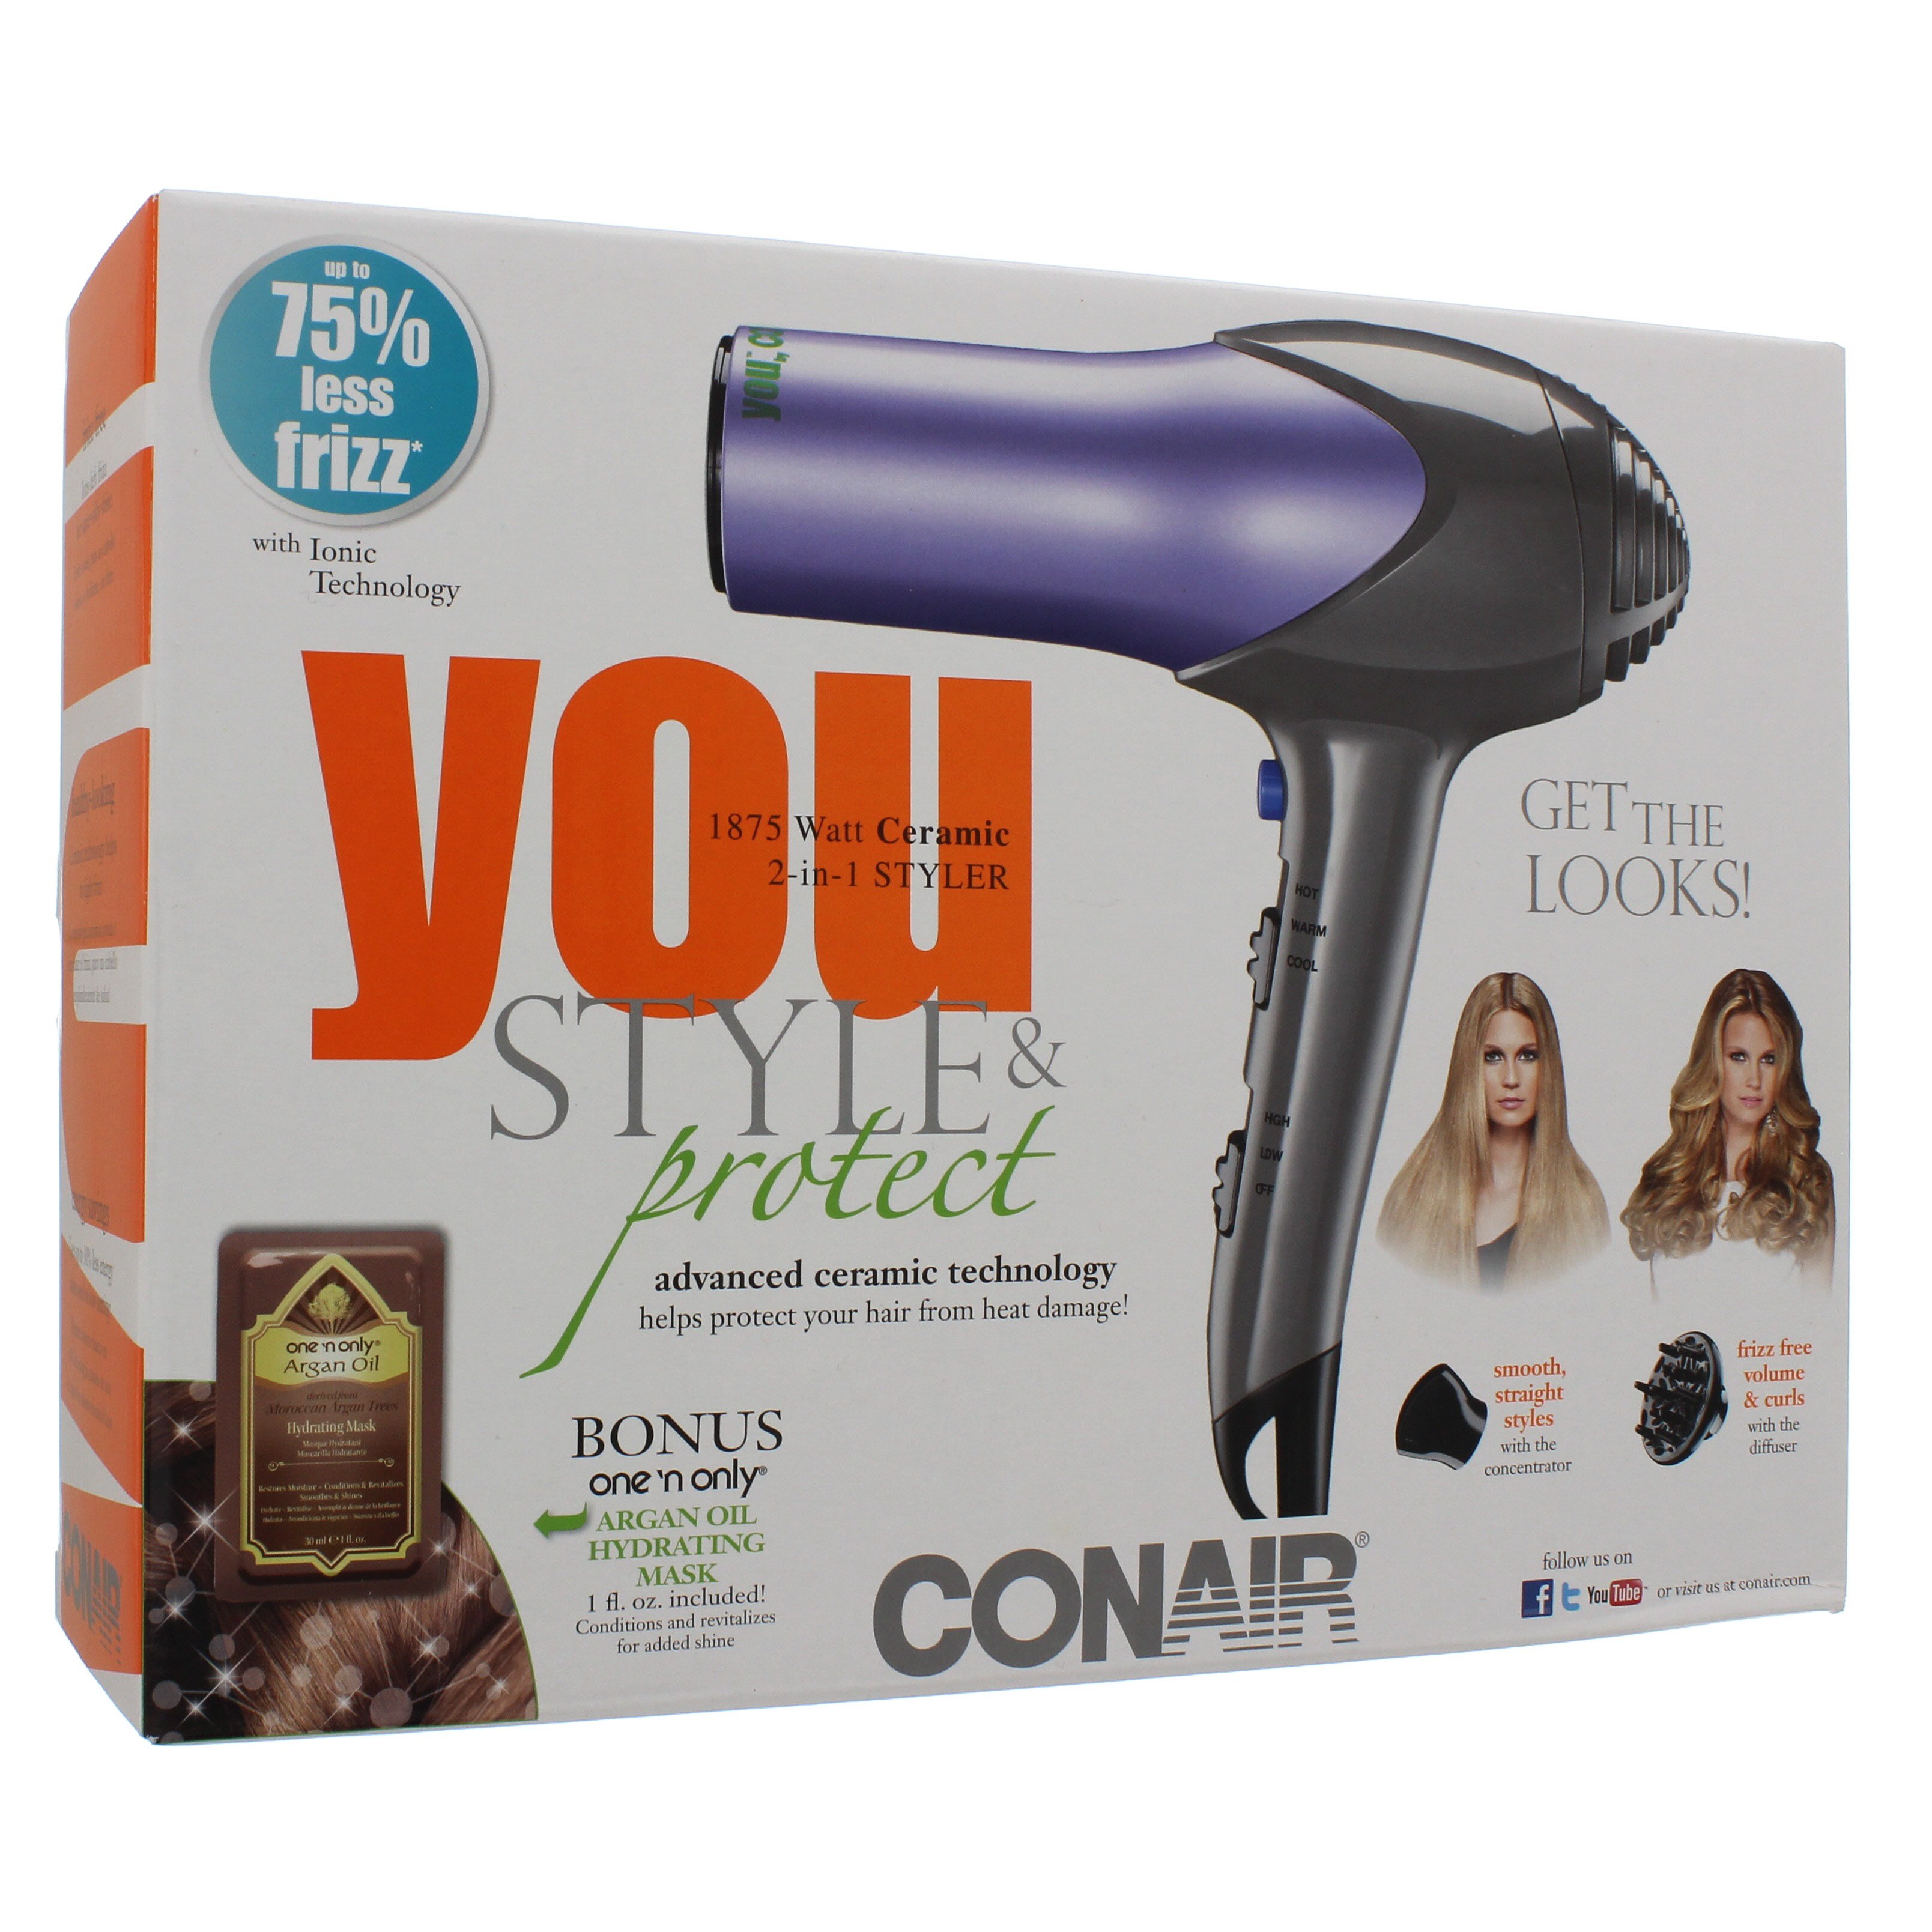 Conair YOU Style & Protect Hair Dryer - Shop Conair YOU Style & Protect Hair  Dryer - Shop Conair YOU Style & Protect Hair Dryer - Shop Conair YOU Style  & Protect